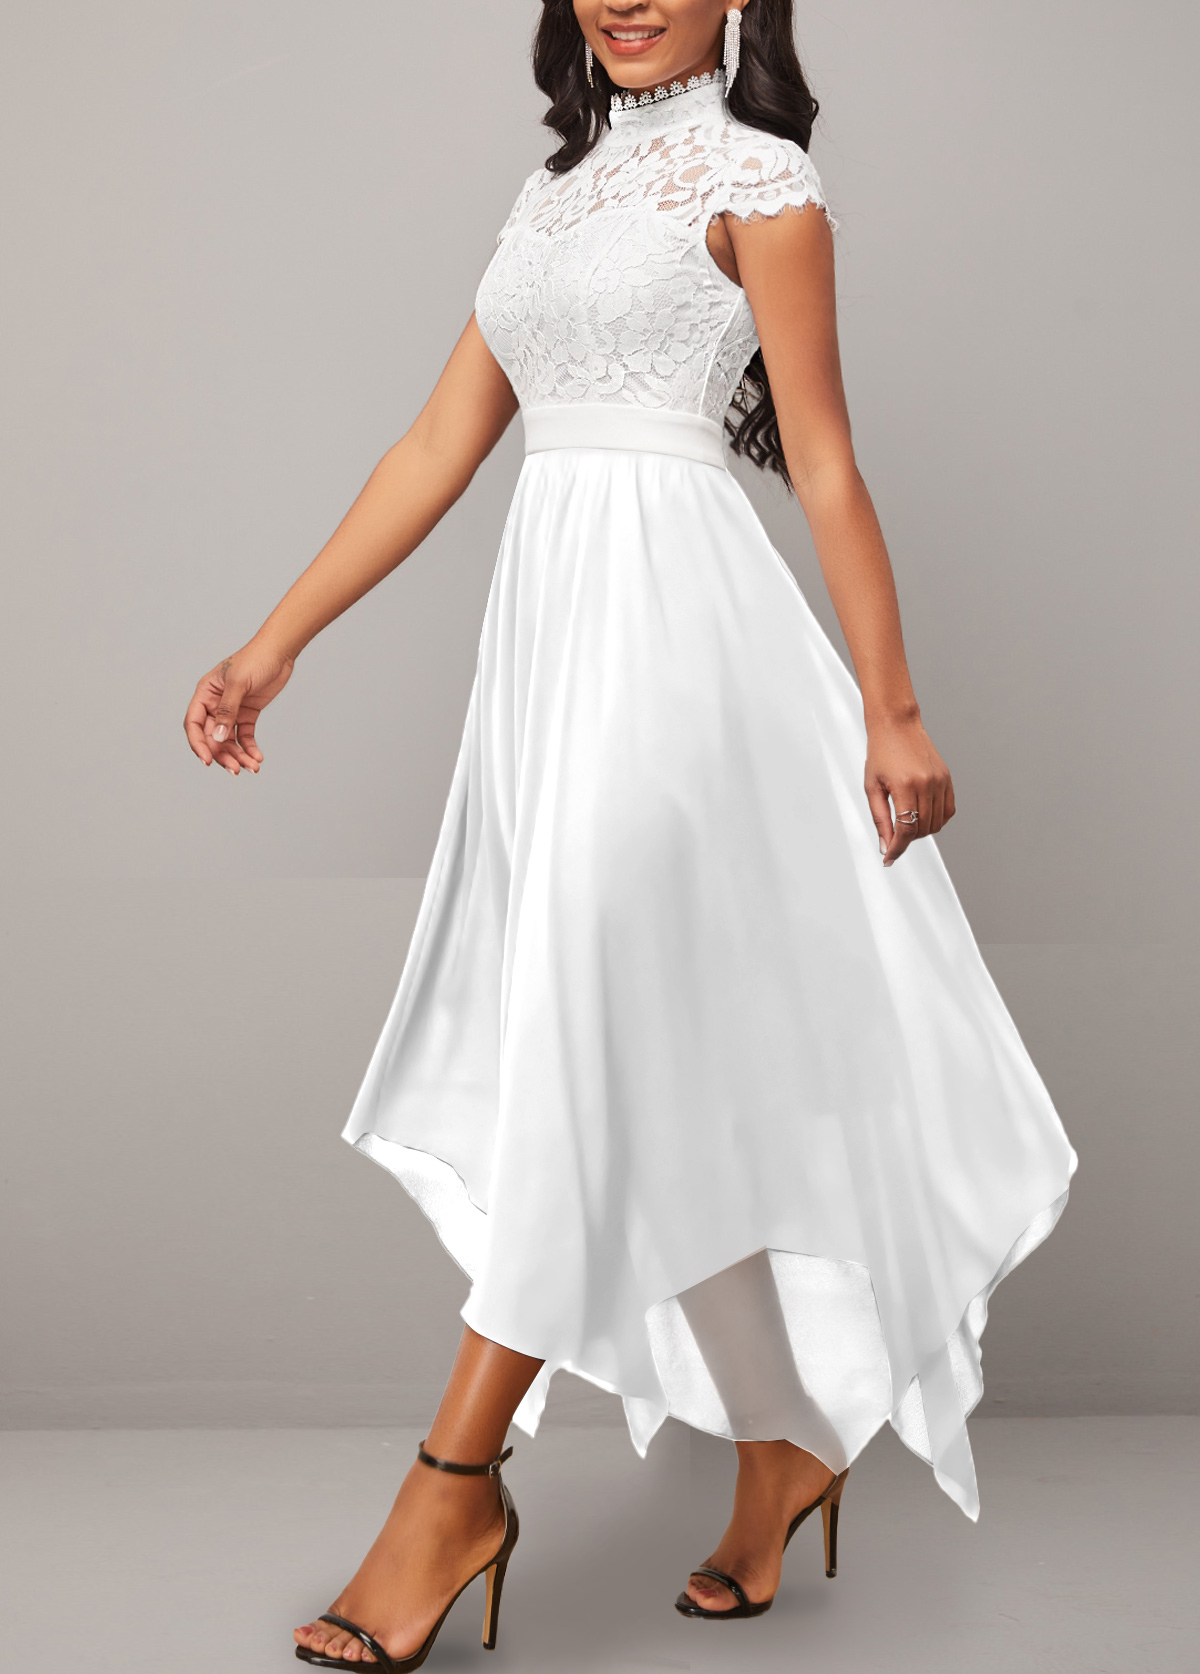 Lace Stand Collar Short Sleeve White Dress